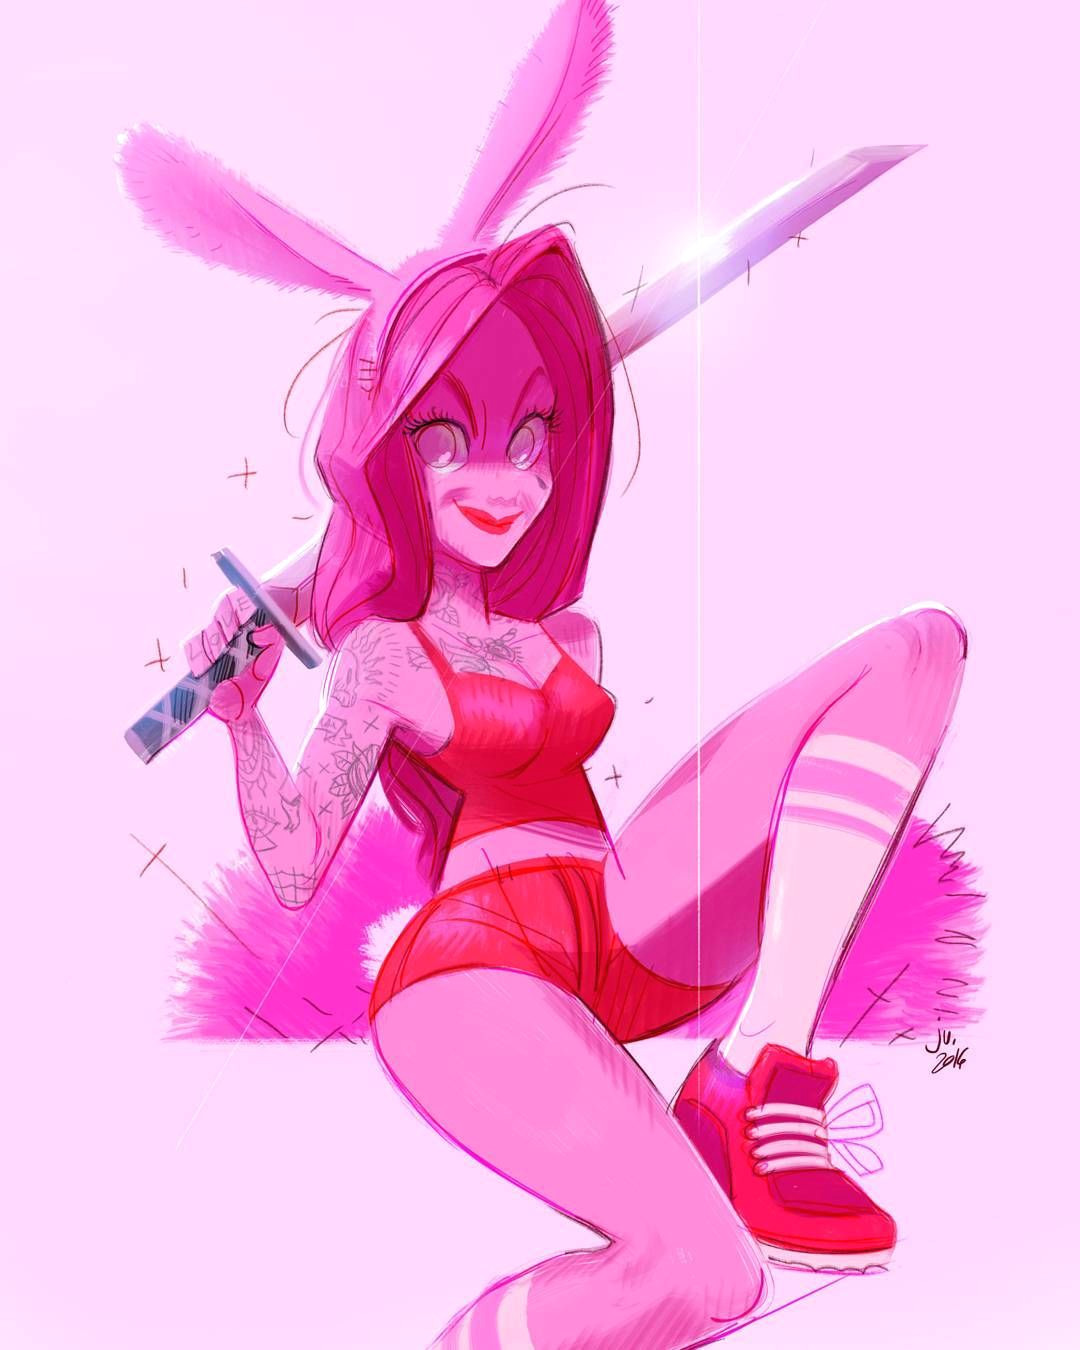 pinky girl with japanese saber because why not i m on holidays pinky girl tattoed tattooedgirls illustration drawing holidaysstuff holidays